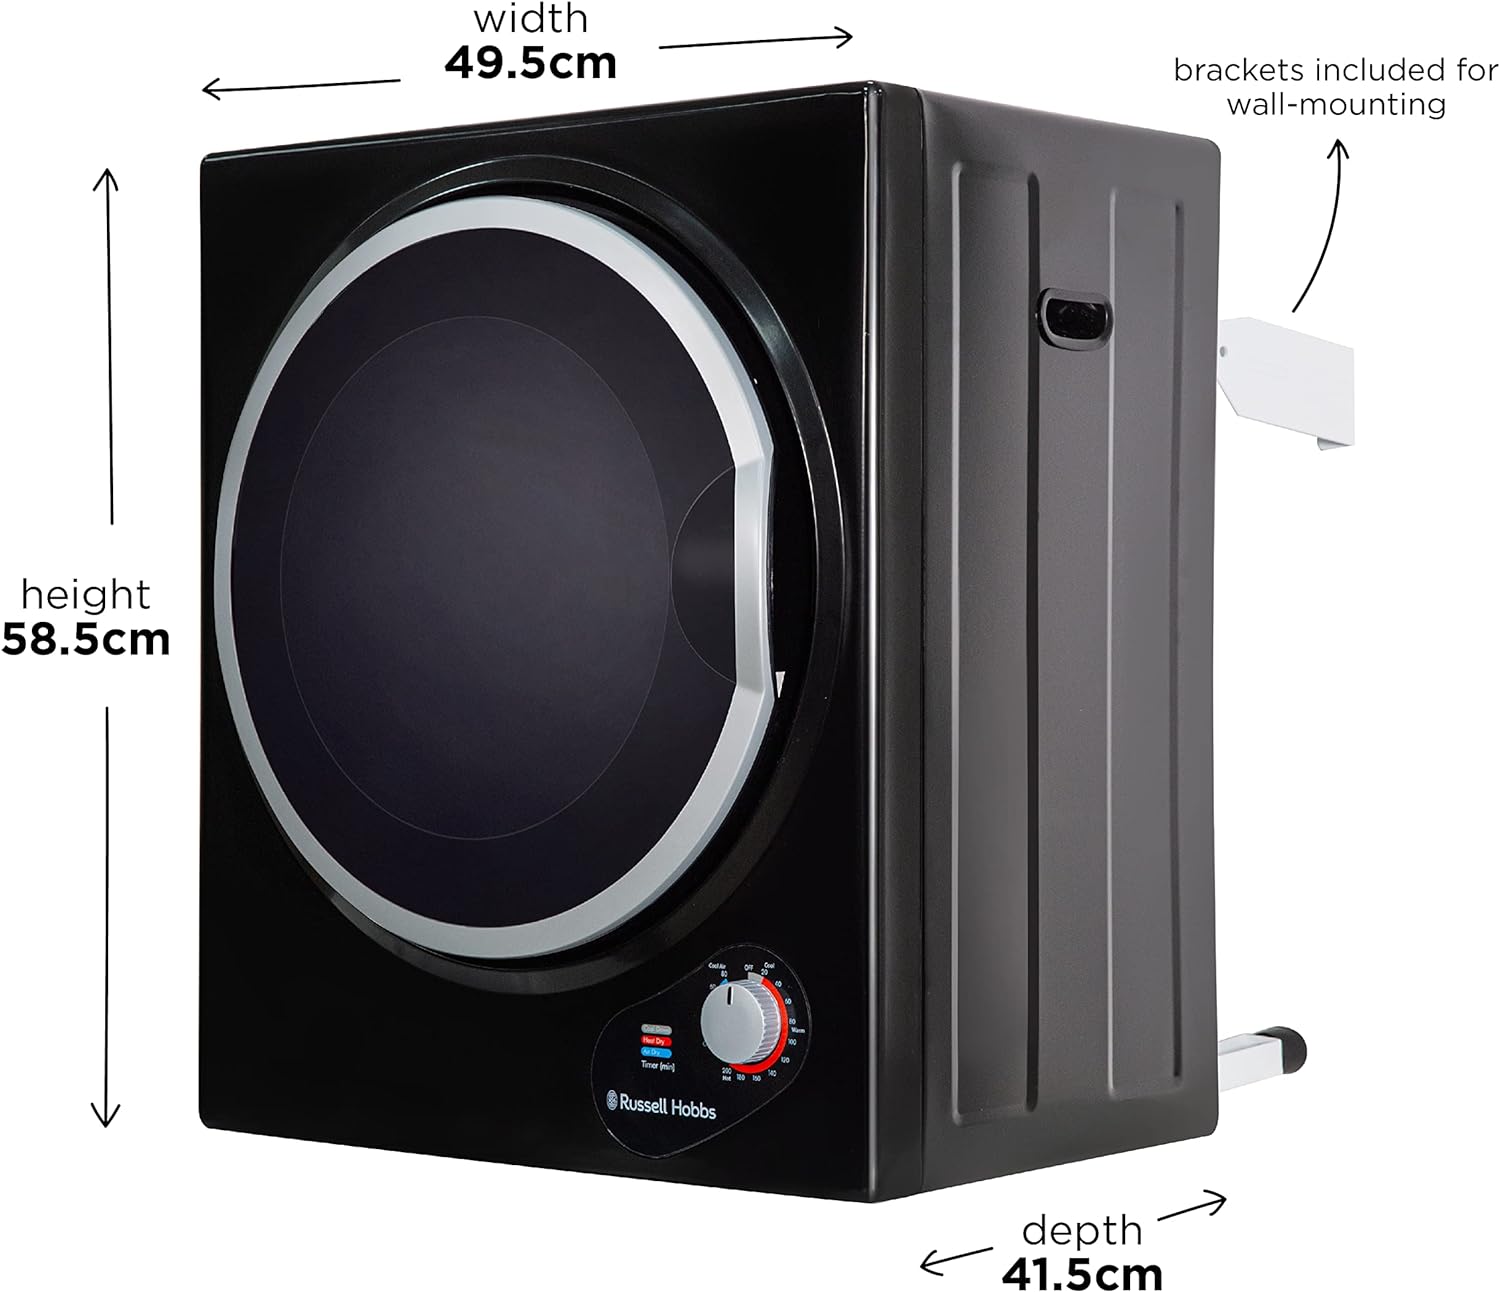 Russell Hobbs RH3VTD800B Black 2.5kg Compact Mini Vented Tumble Dryer, Portable, Freestanding Table top Dryer with 3 Heat Settings small - Amazing Gadgets Outlet